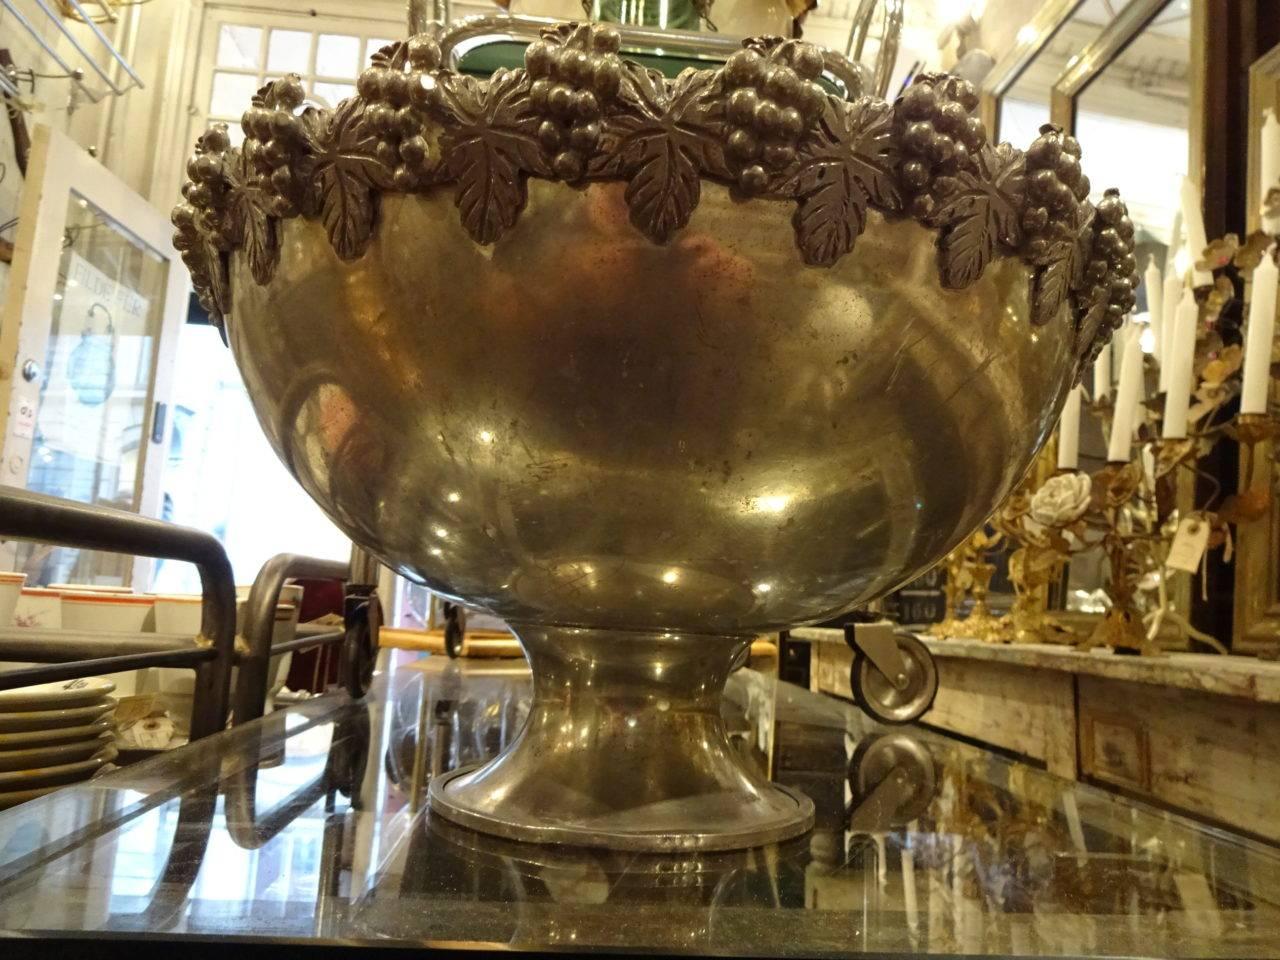 Old French champagne cooler in tin with amazing patina and ornaments of grapes and wine leaves along the edge of the cooler.
The cooler is lifted beautifully on foot and can accommodate 4-6 champagne bottles.

Measures: H 24 x diameter 41 cm.